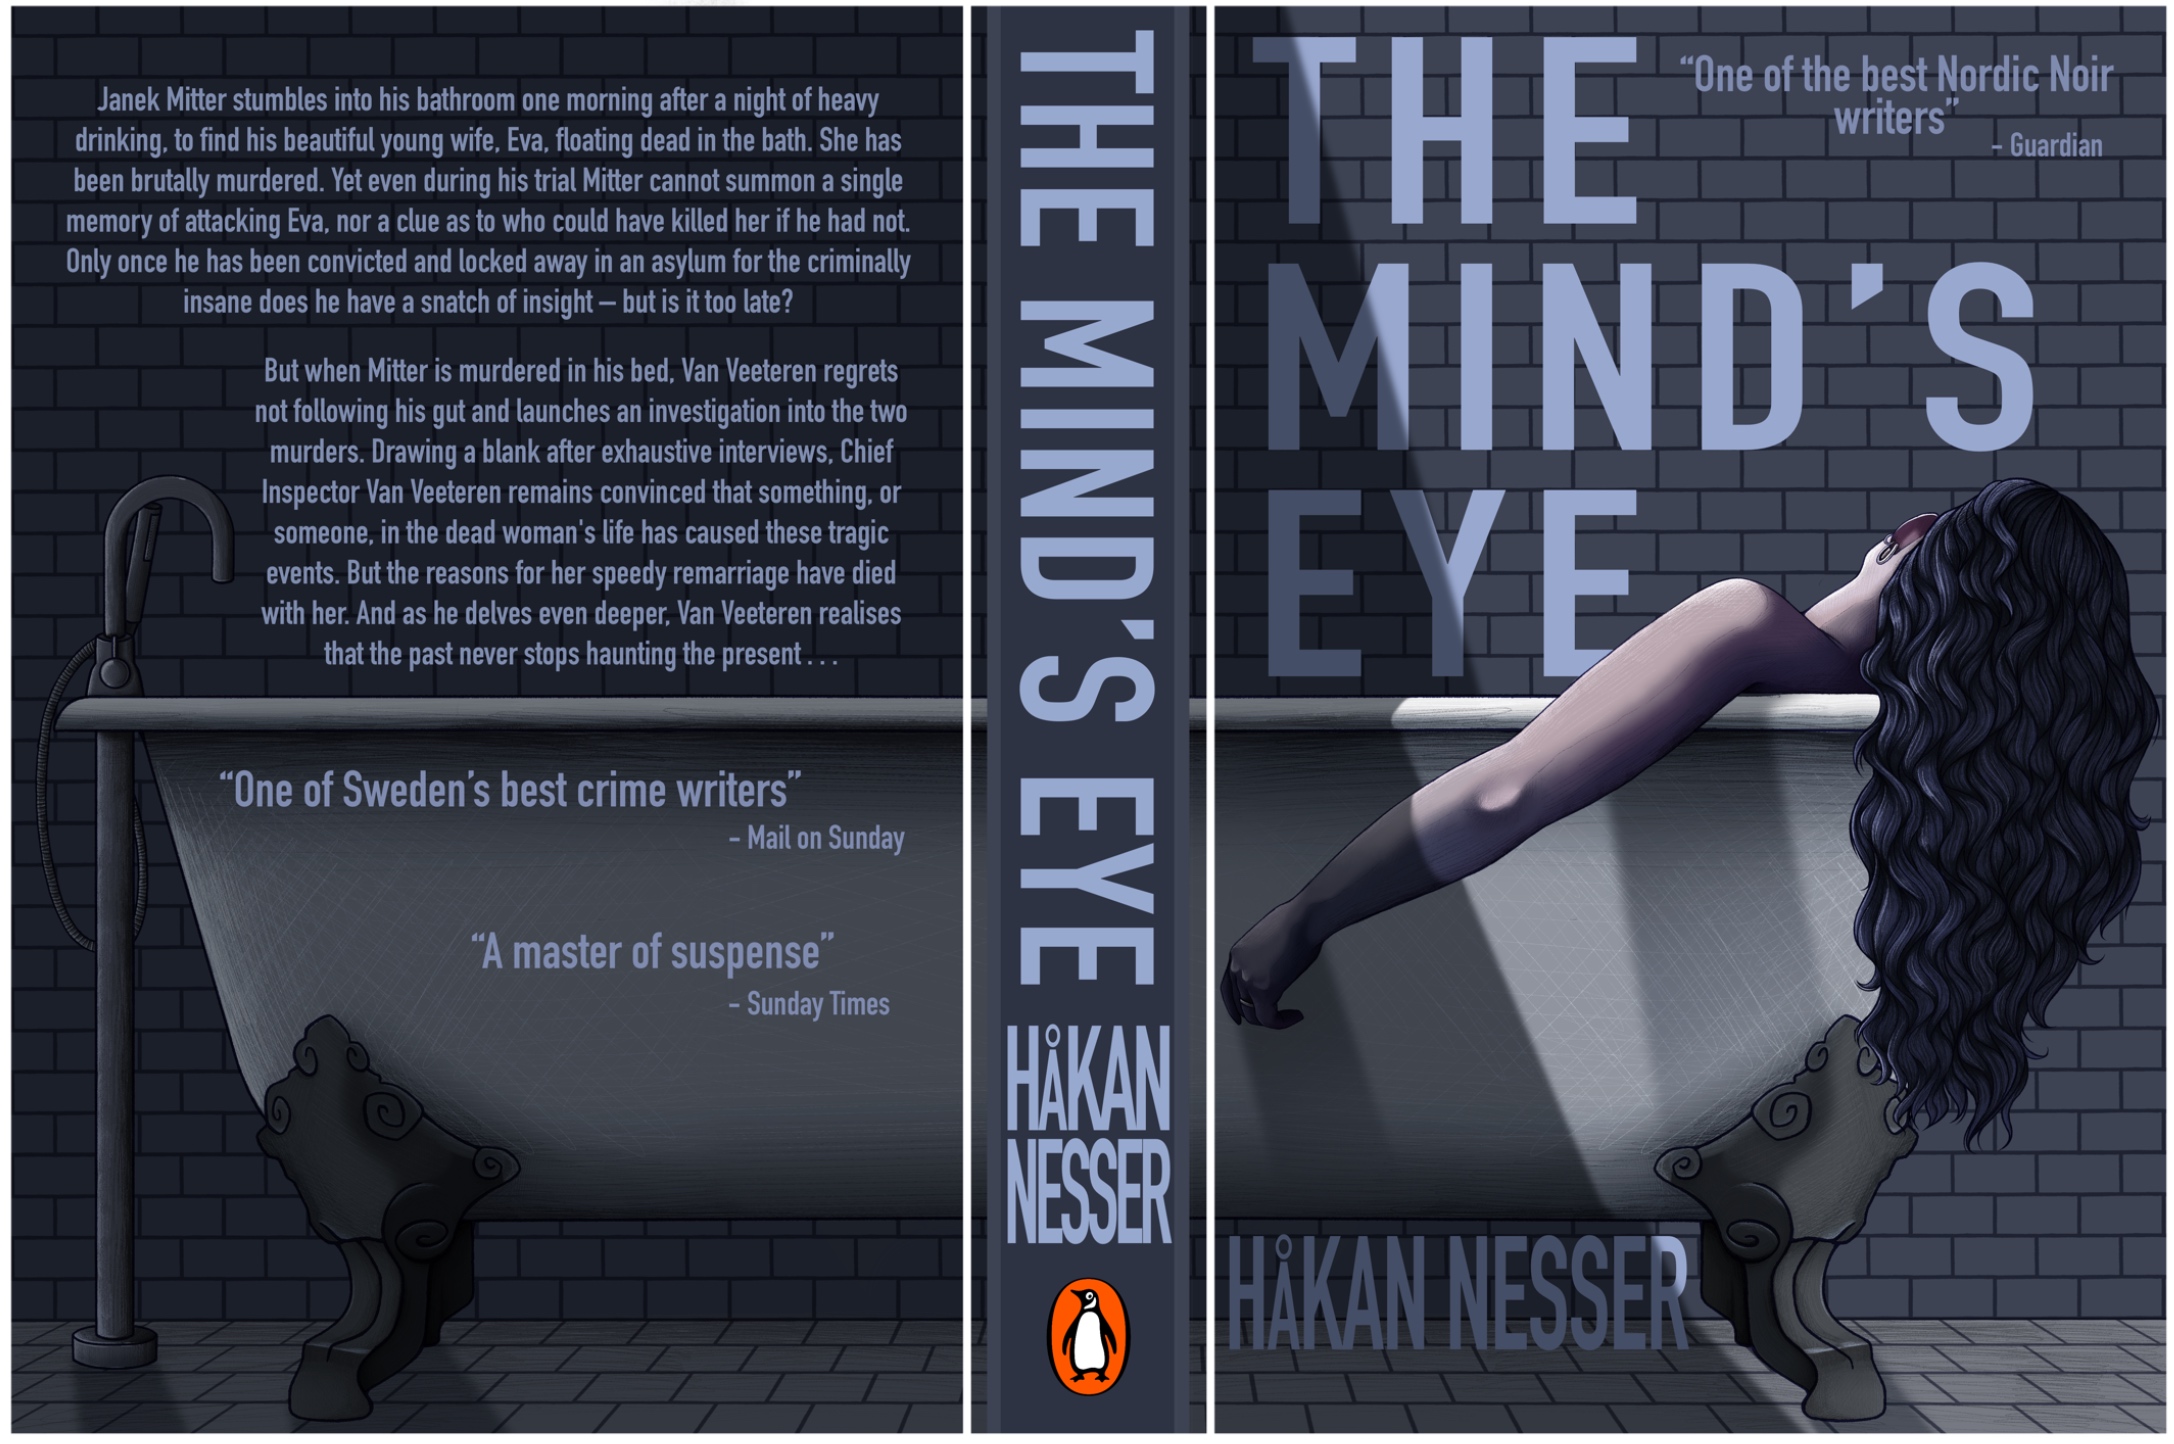 BA Illustration work by Elliott Adams, Showing a Book Jacket for 'The Mind's Eye' by Hakan Nesser, featuring a woman laying in a bathtub with her hair hanging over the edge, in a moody palette of greys and blues